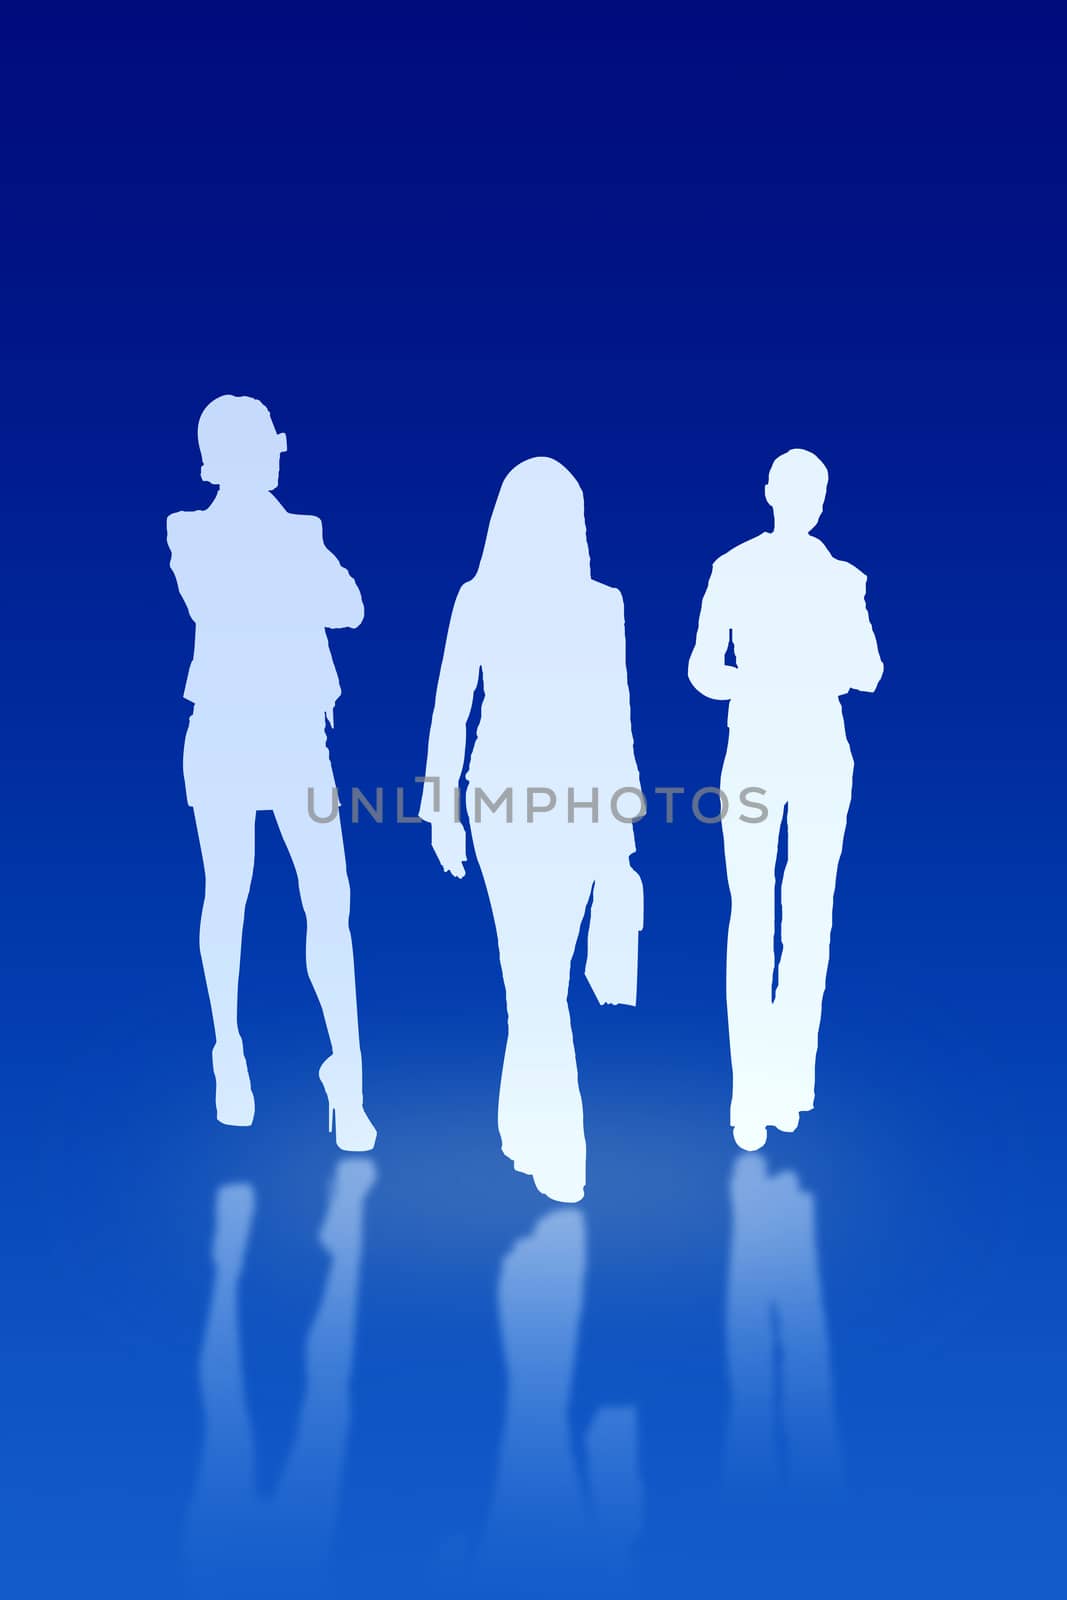 Abstract illustration on the theme business team. The blue gradient background shows the contours of people